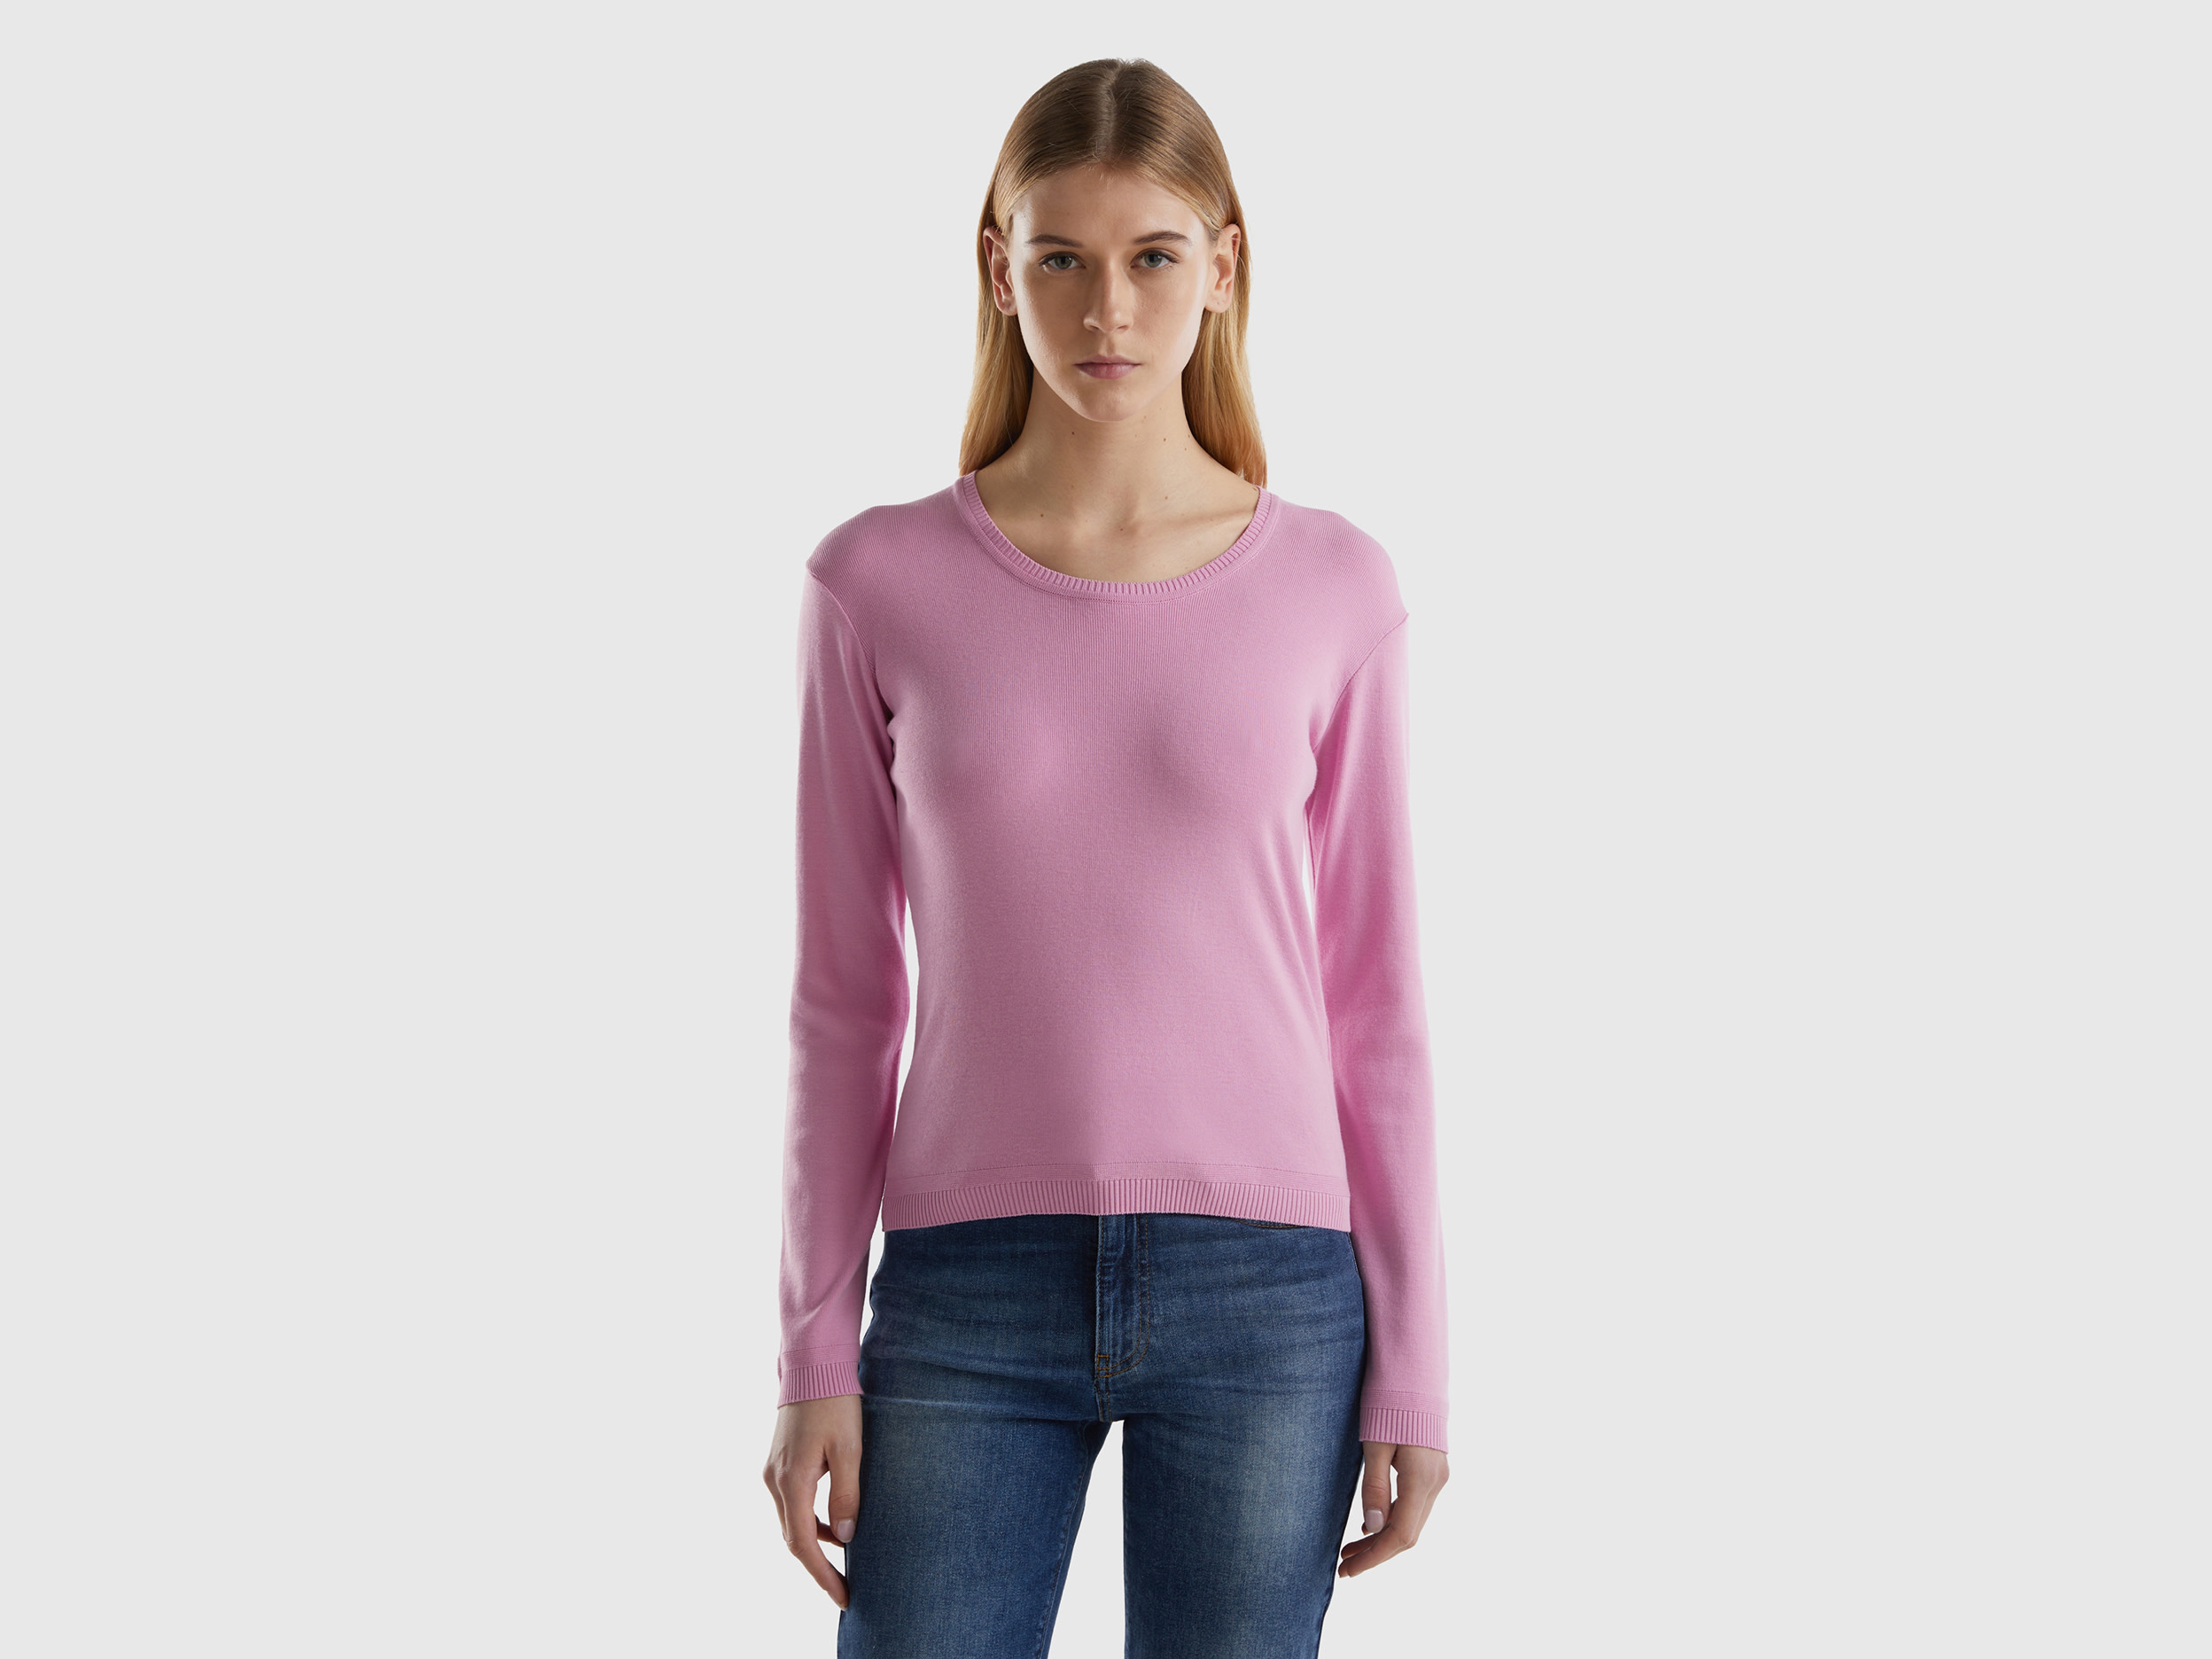 Benetton, Crew Neck Sweater In Pure Cotton, size XS, Pastel Pink, Women